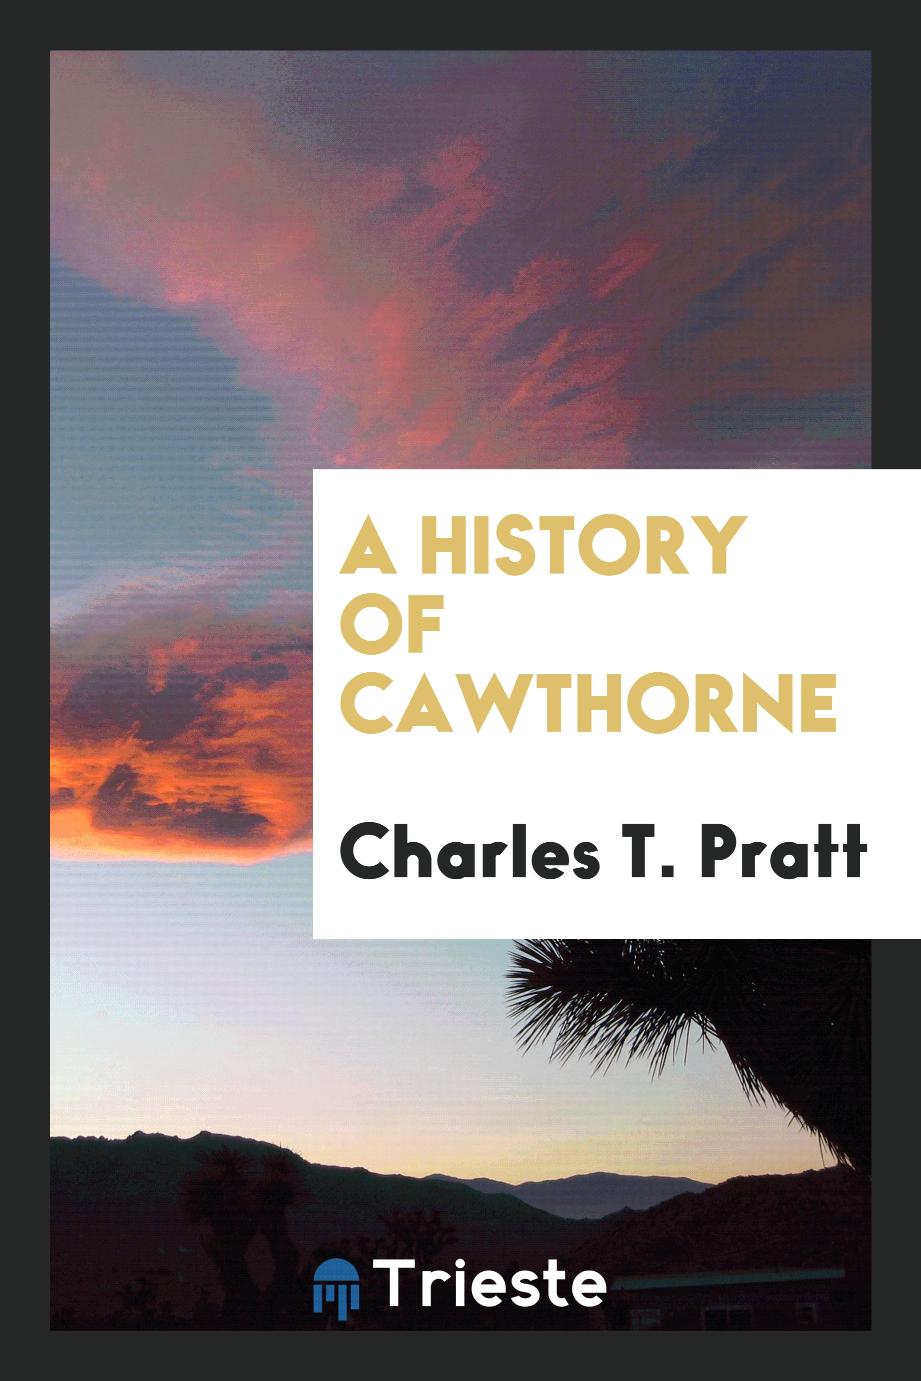 A History of Cawthorne